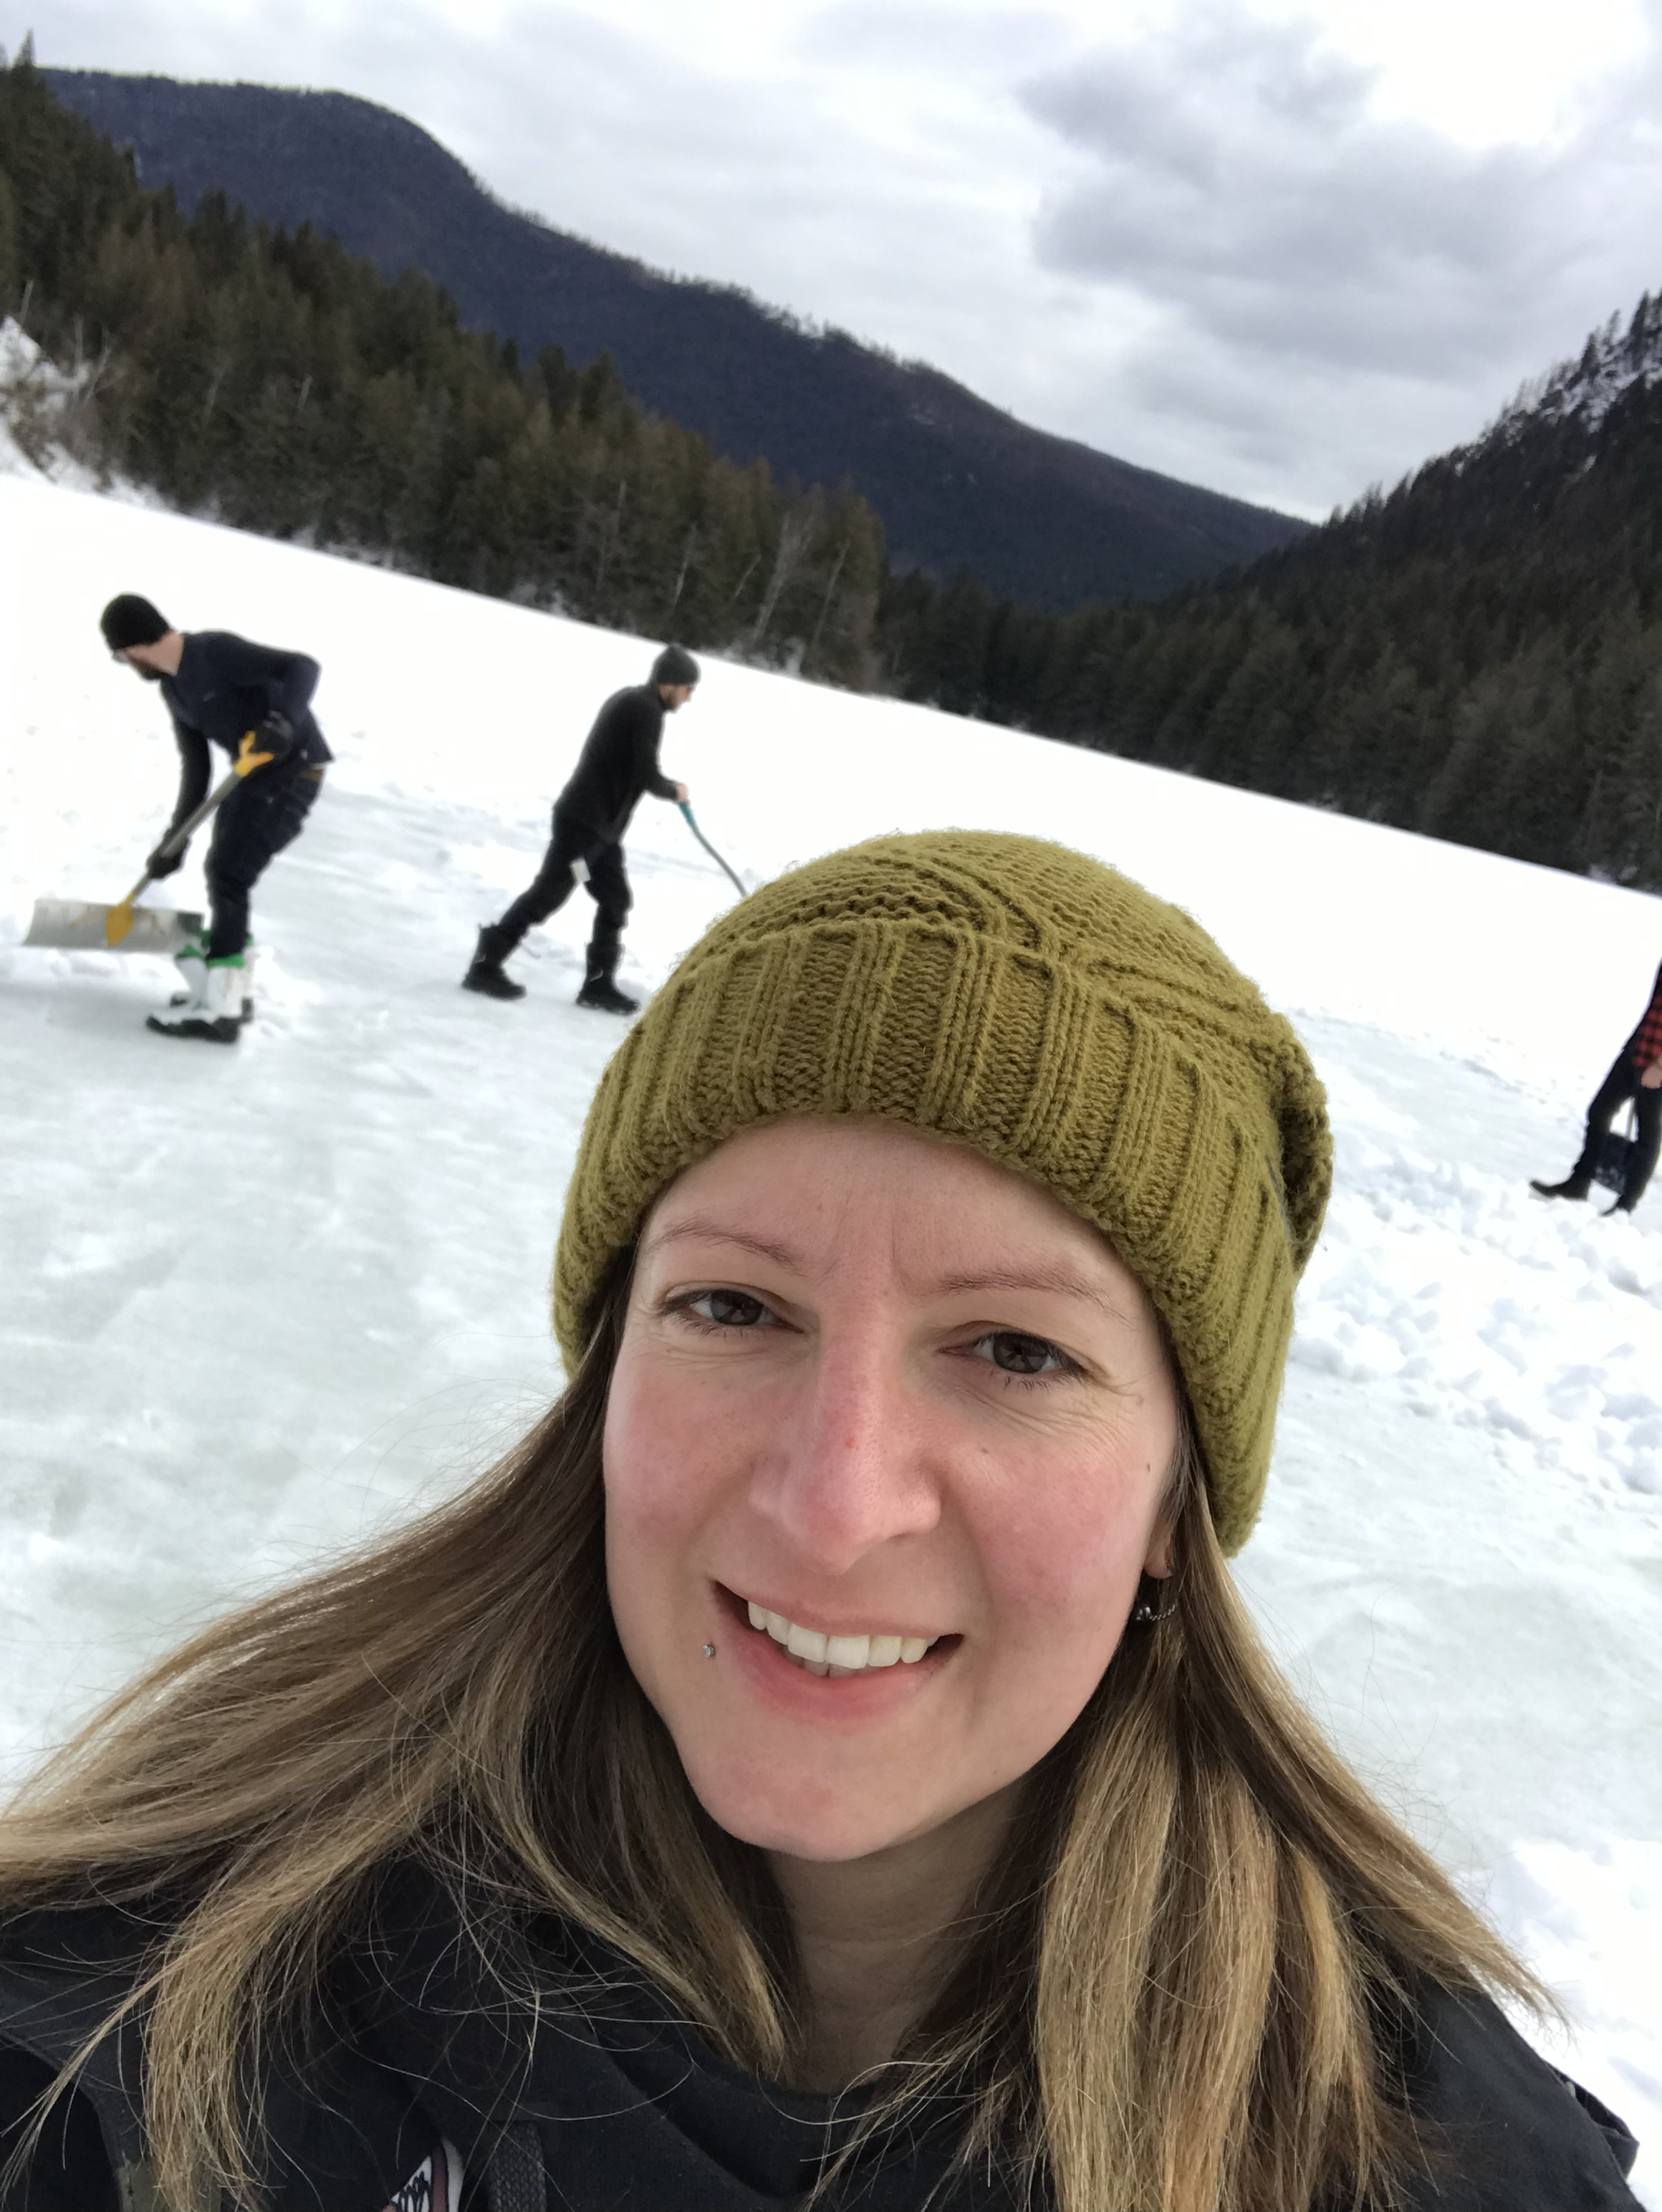 Lisa Deargle in the snow at Echo Lake